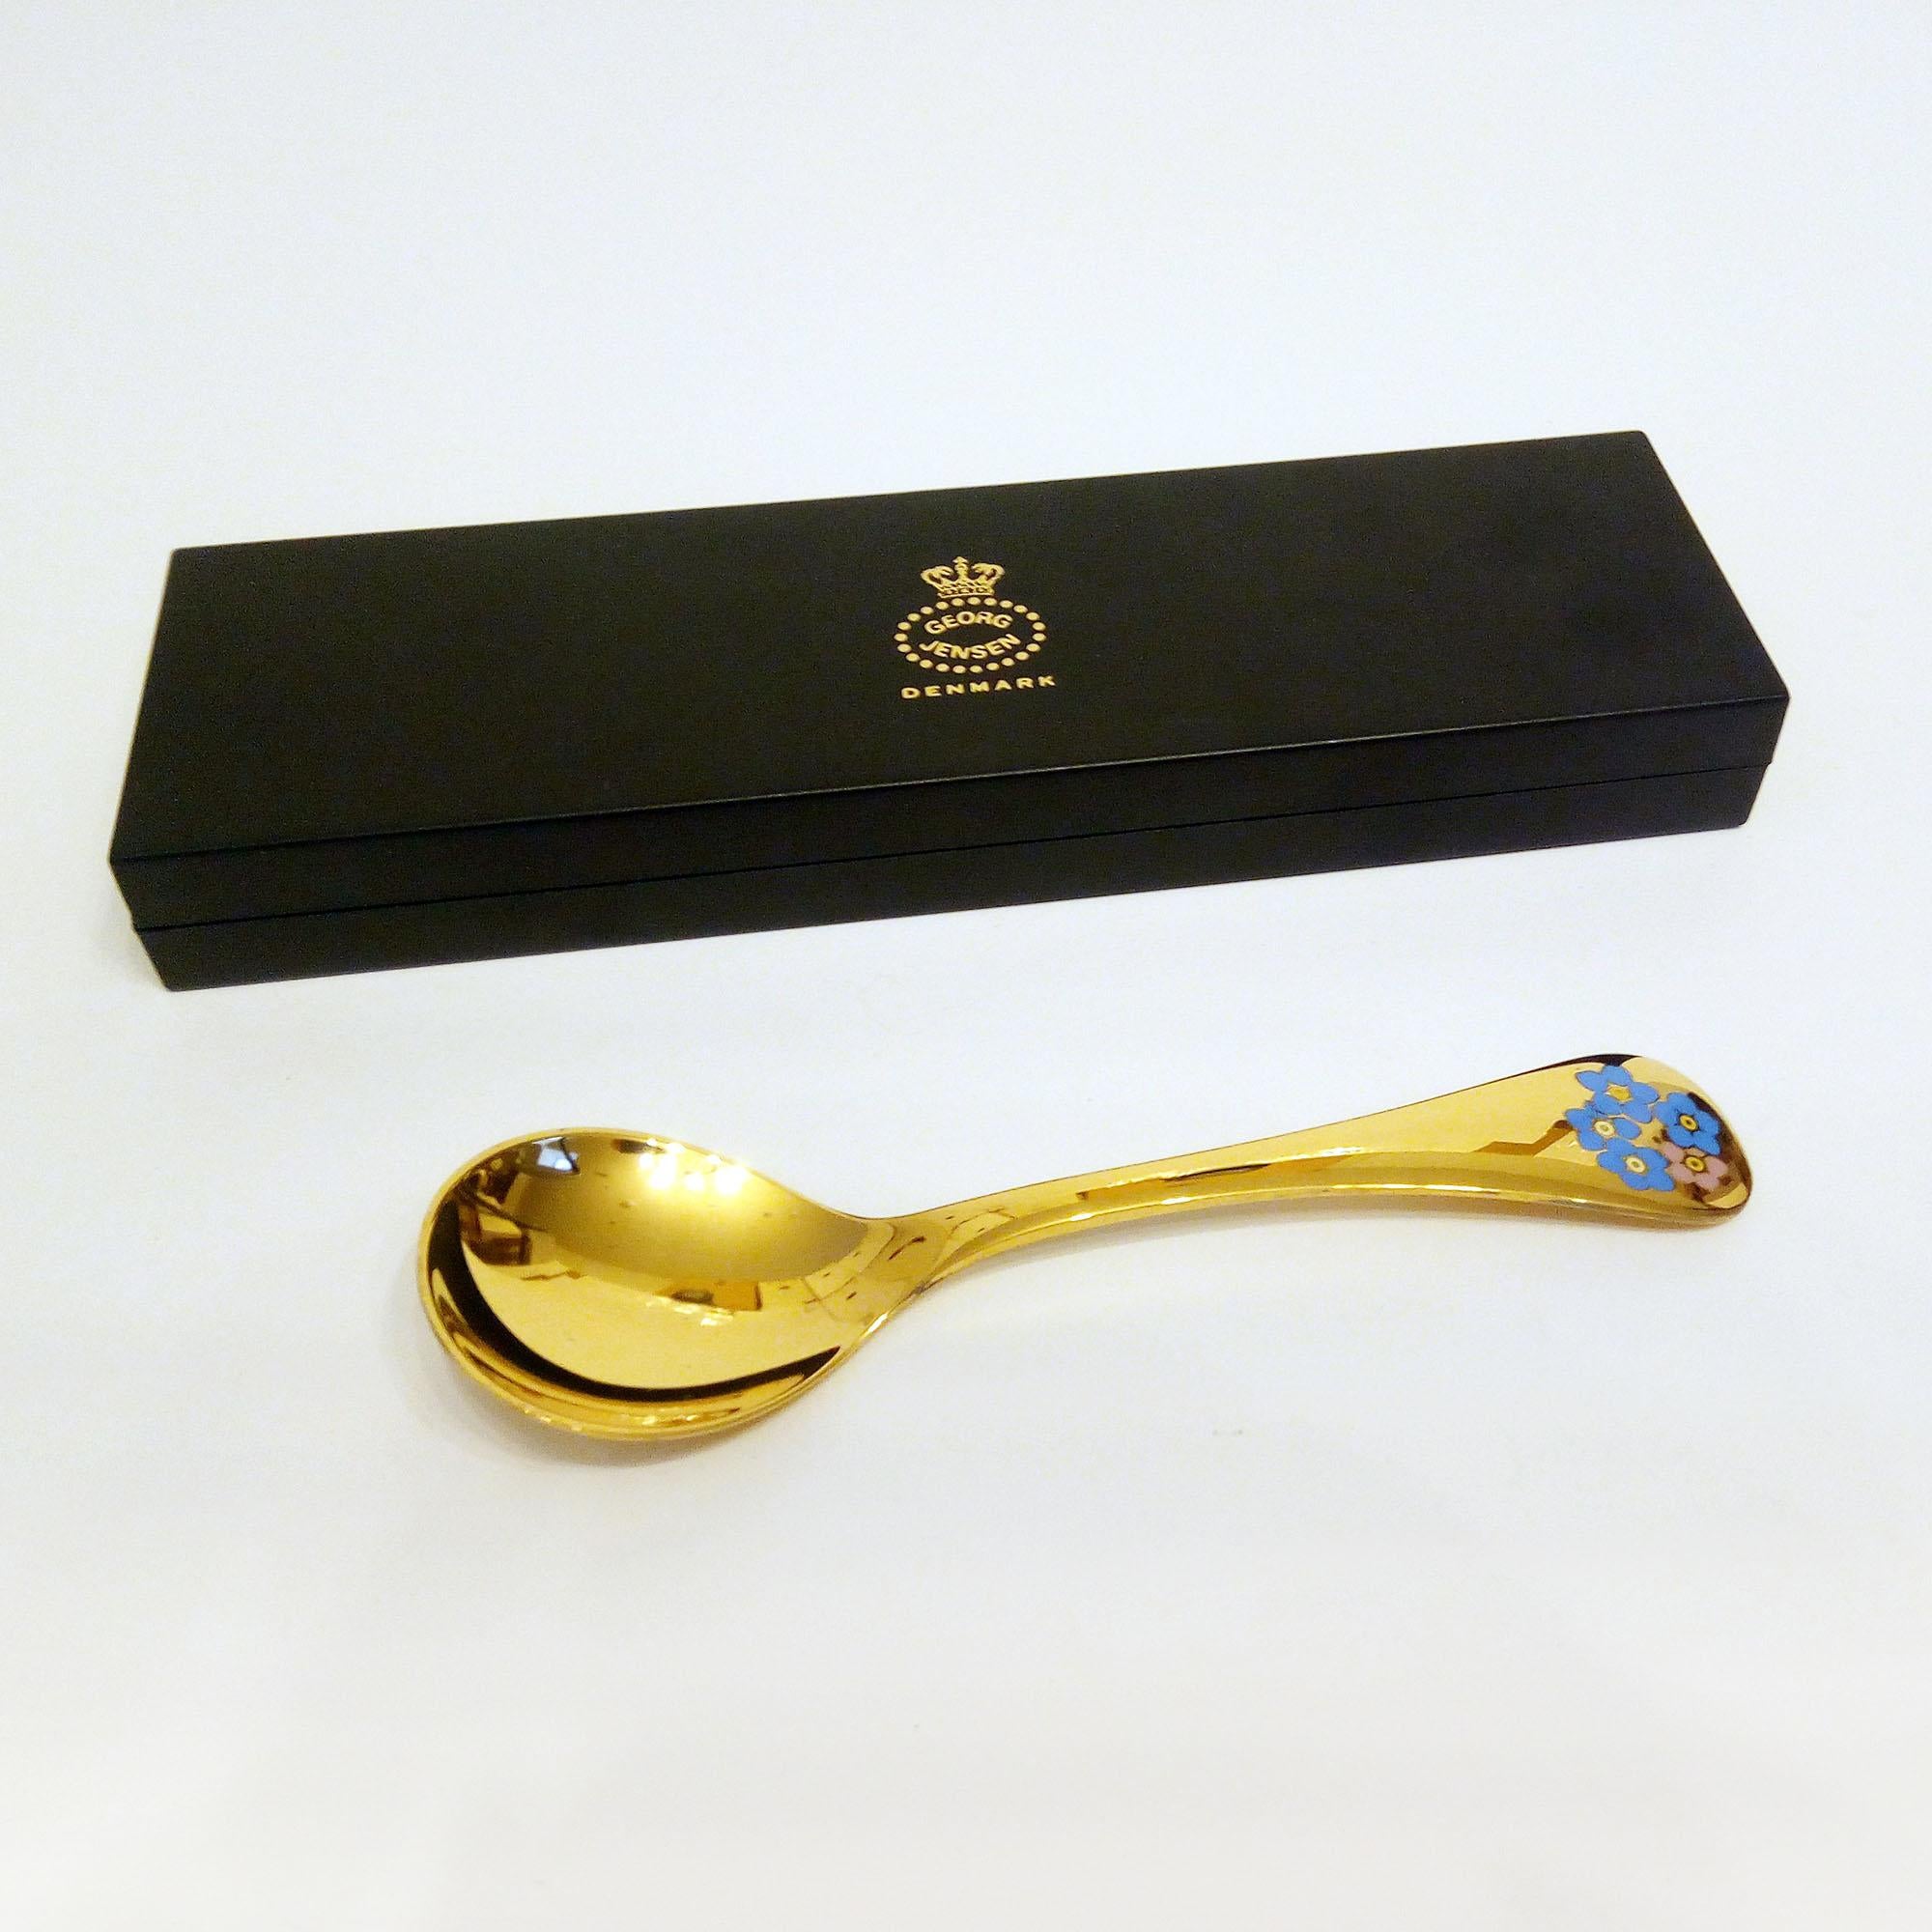 Annual spoon 1983 in original box, designed by Annelise Björner, edited by Georg Jensen.
Annual spoons series began in 1971. Each spoon is crafted in sterling silver, then gold-plated and enameled with a wildflower chosen for that year. The 1983